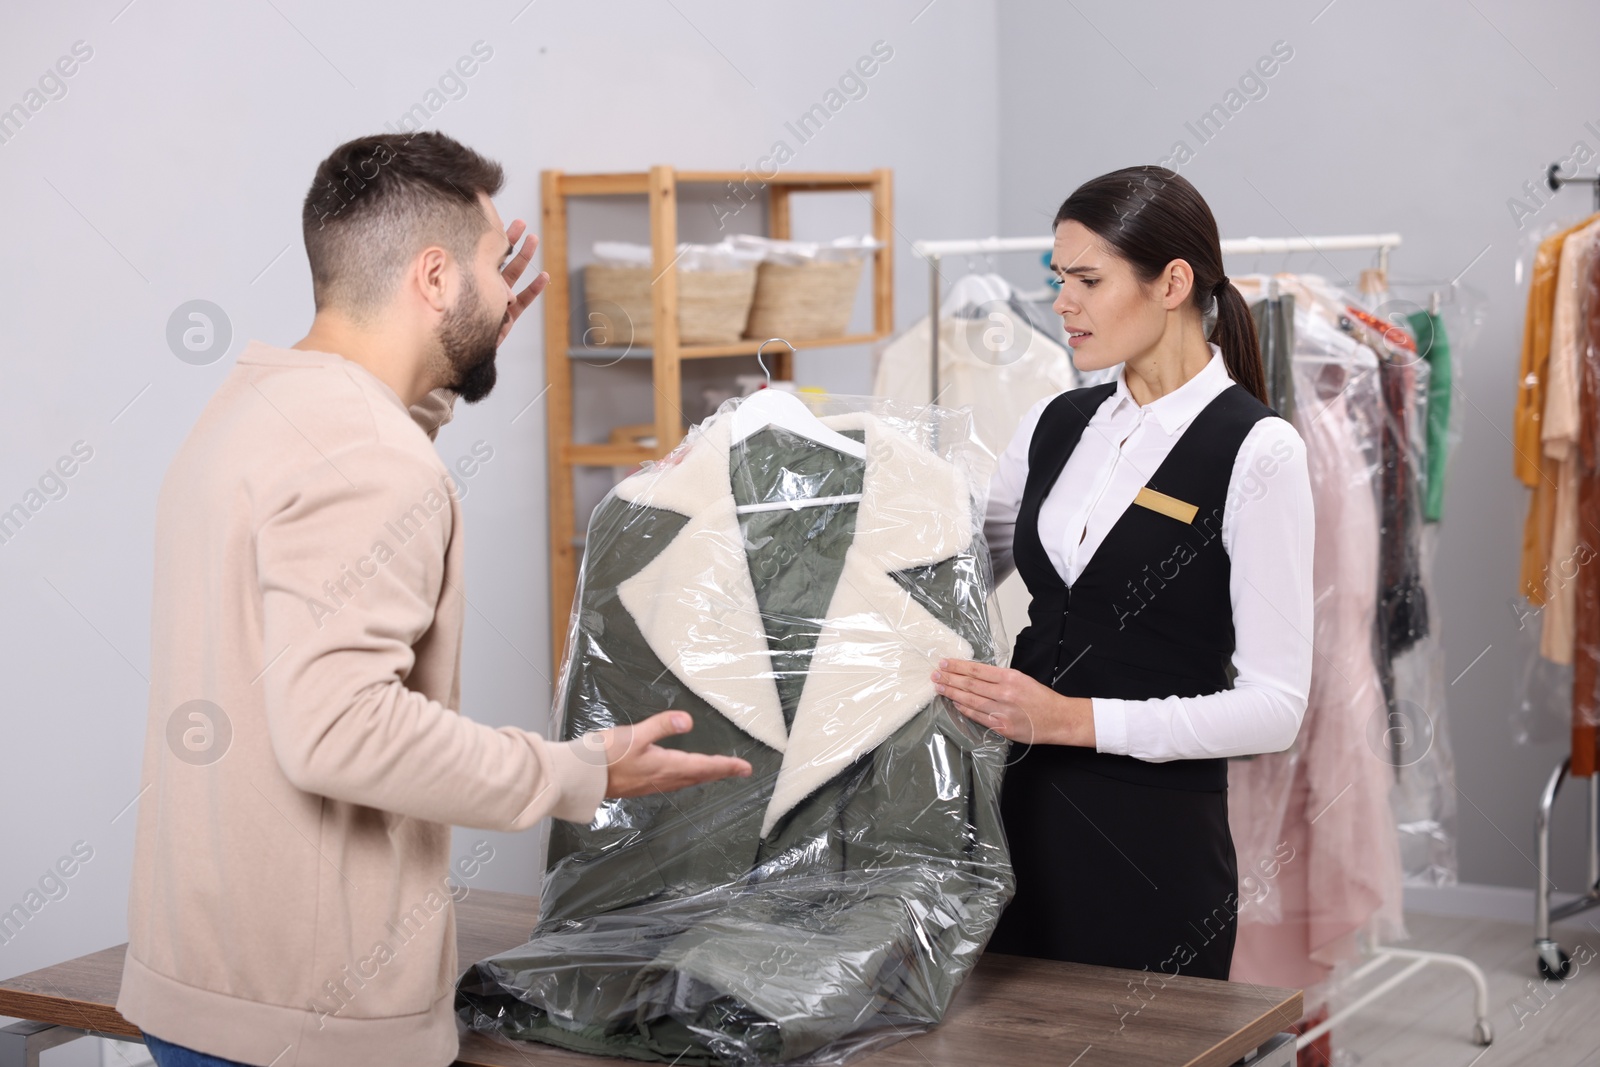 Photo of Client complaining about quality of service at dry cleaner's